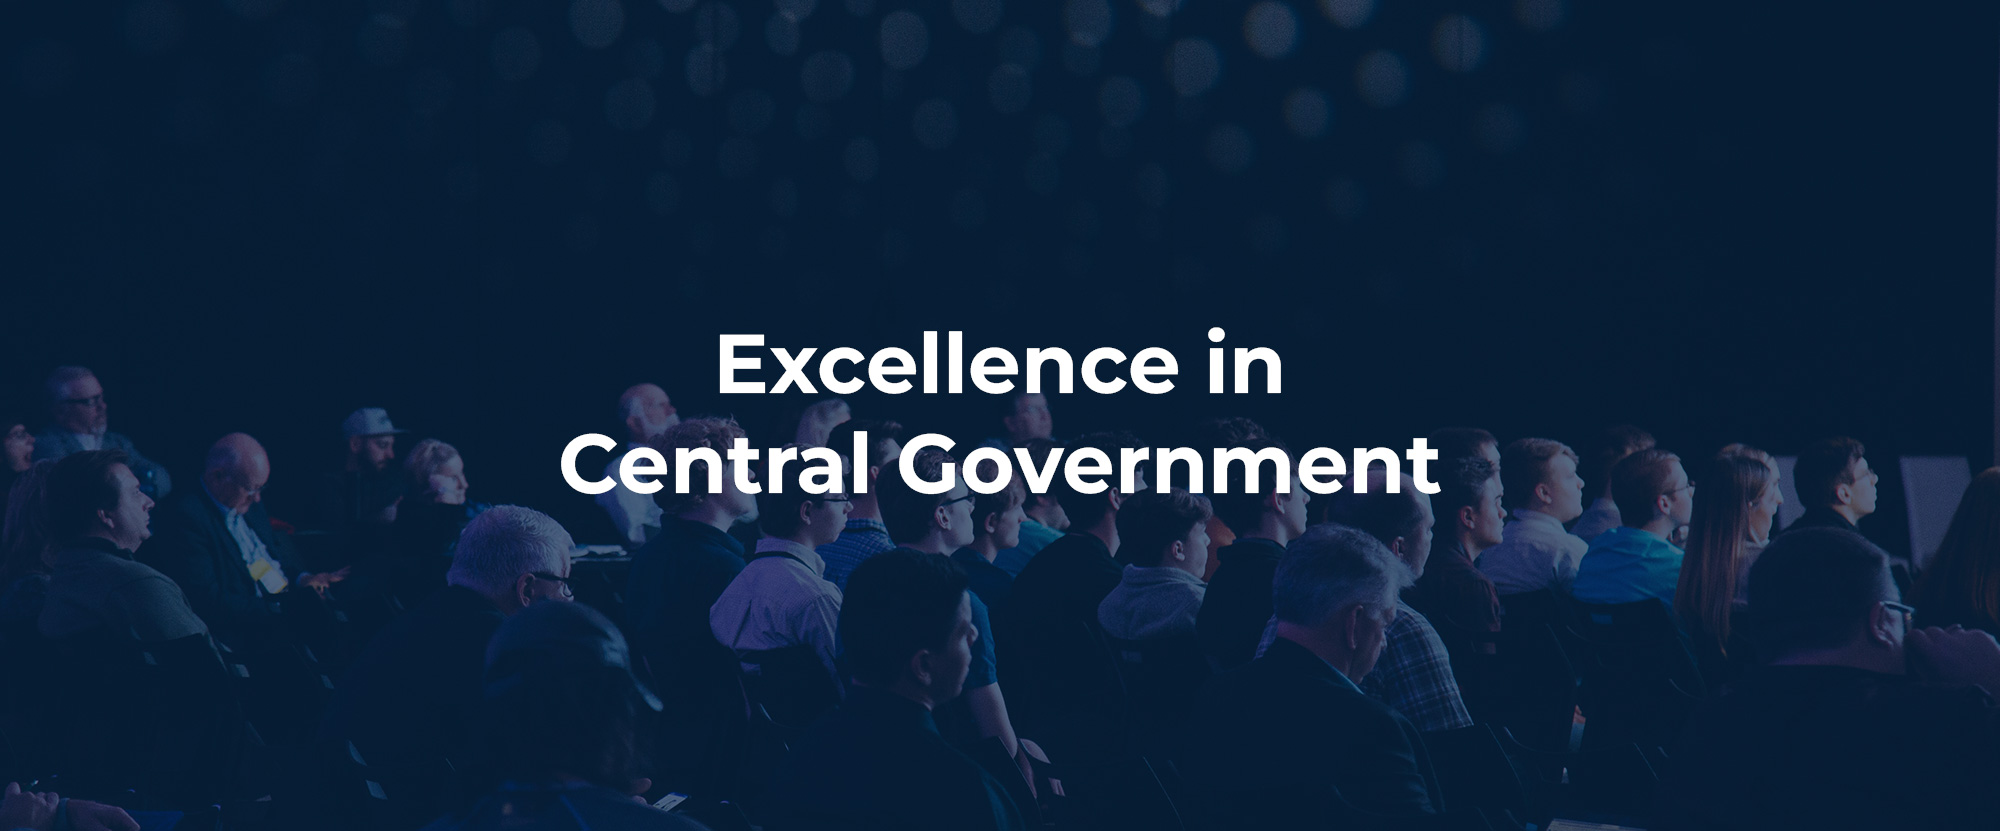 Excellence in Central Government